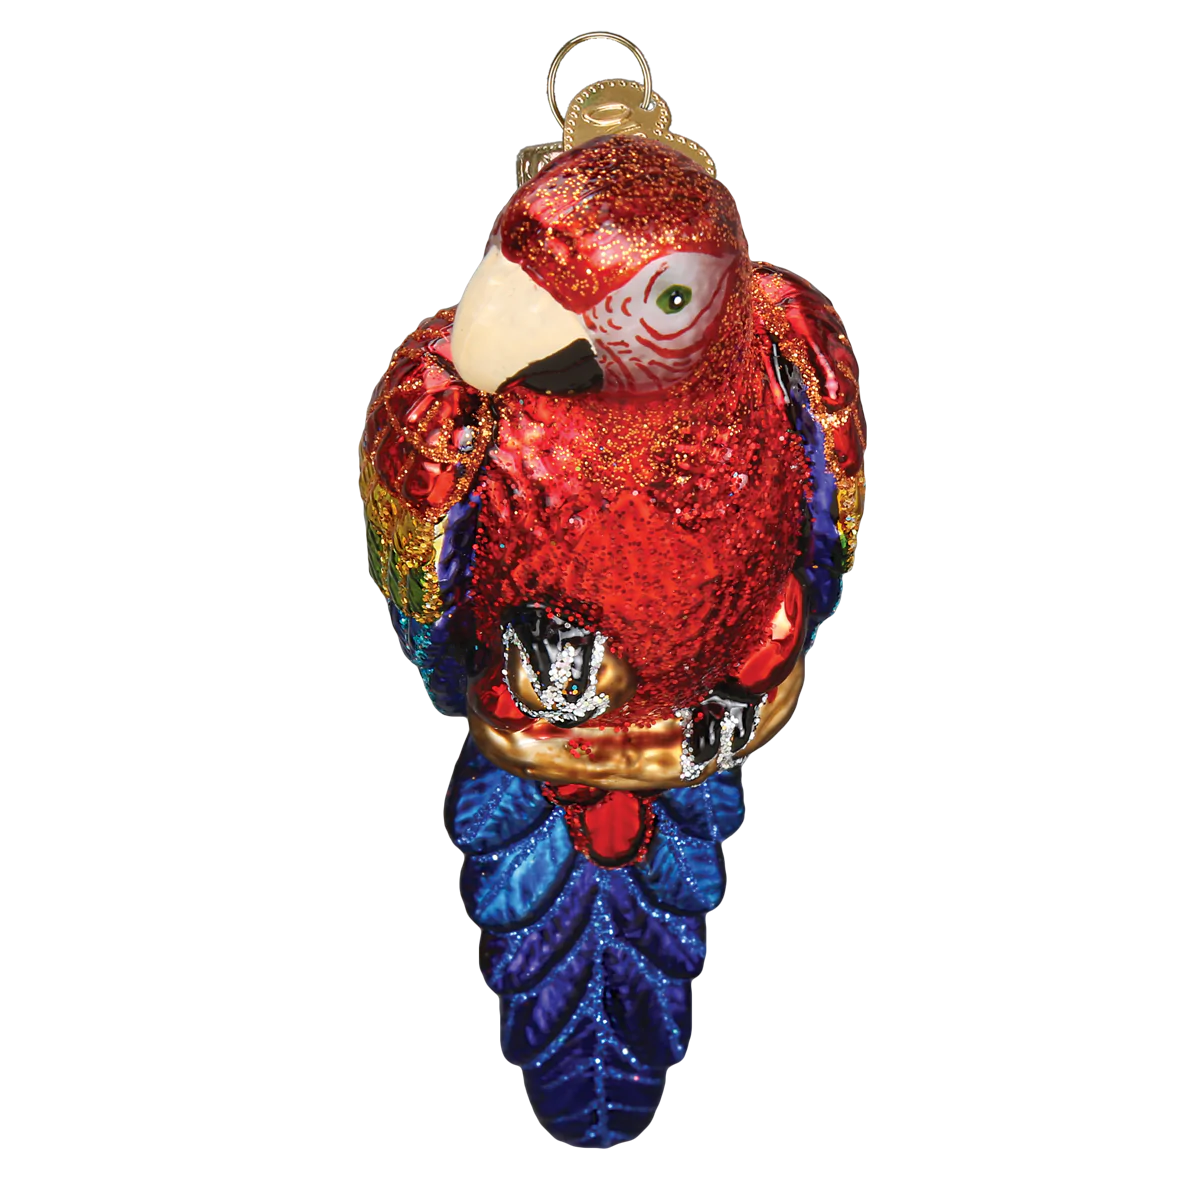 Tropical Parrot Ornament  Old World Christmas   